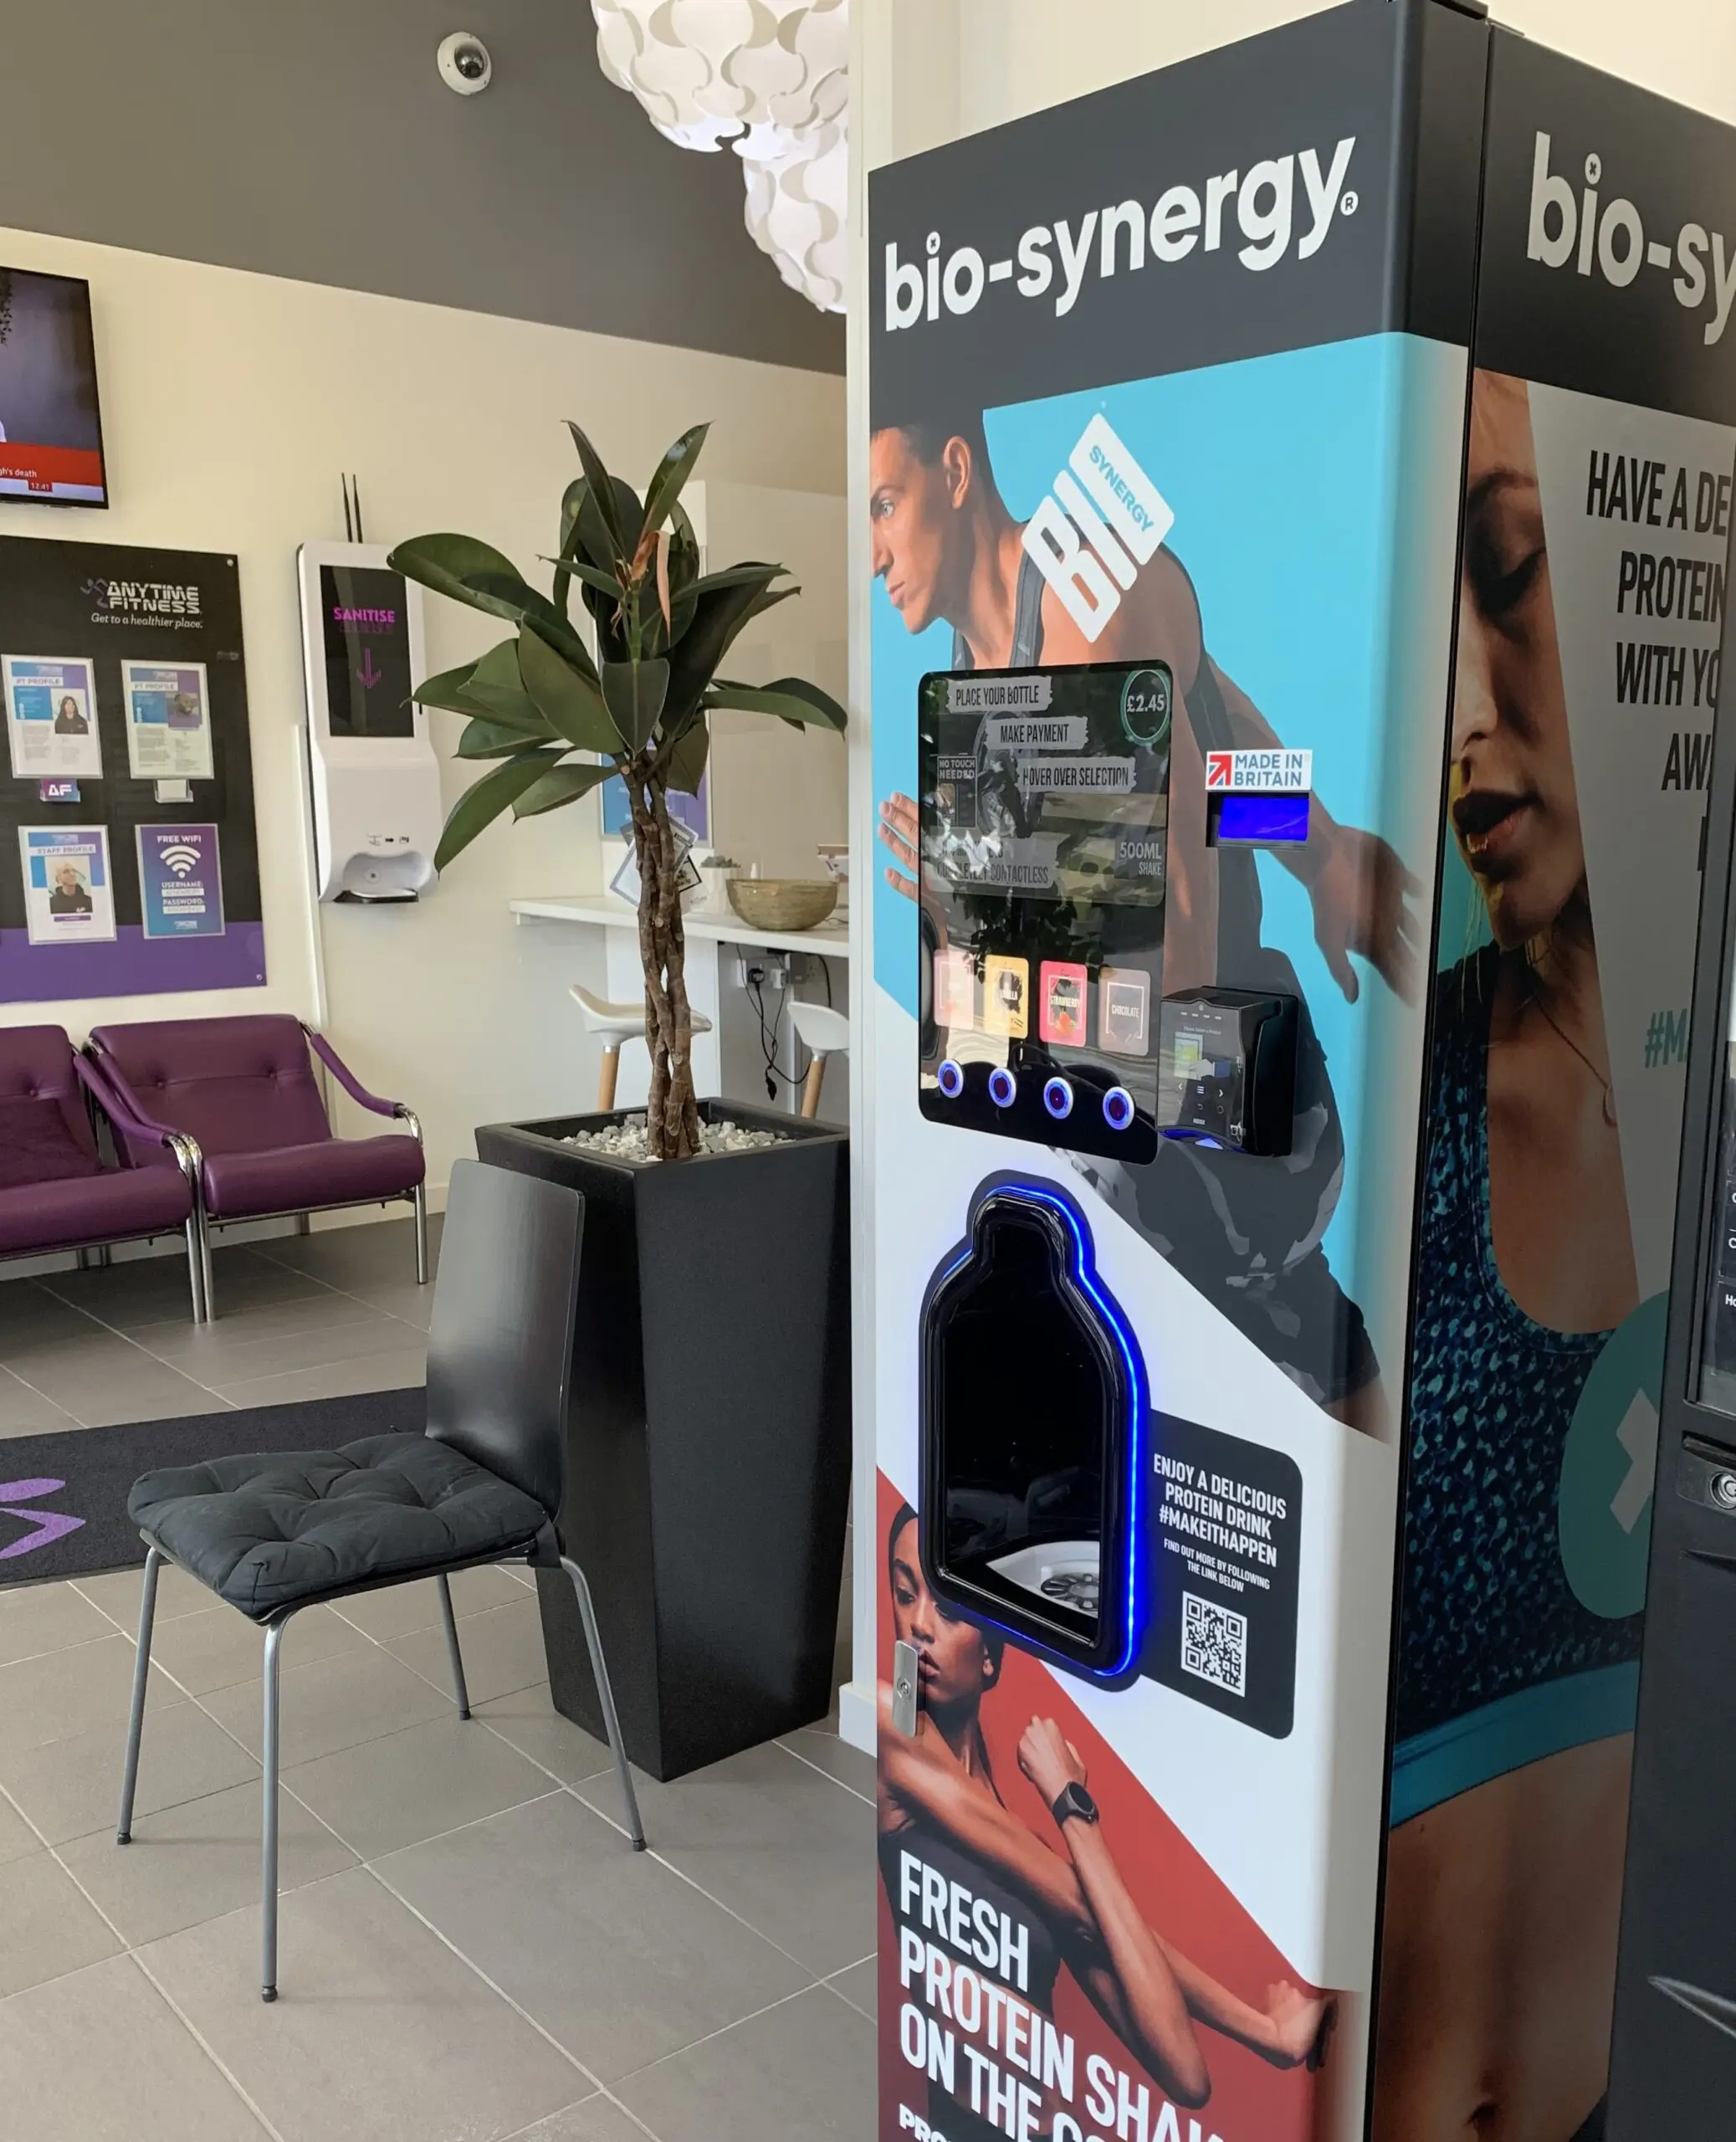 Bio synergy vending machine x anytime fitness scaled